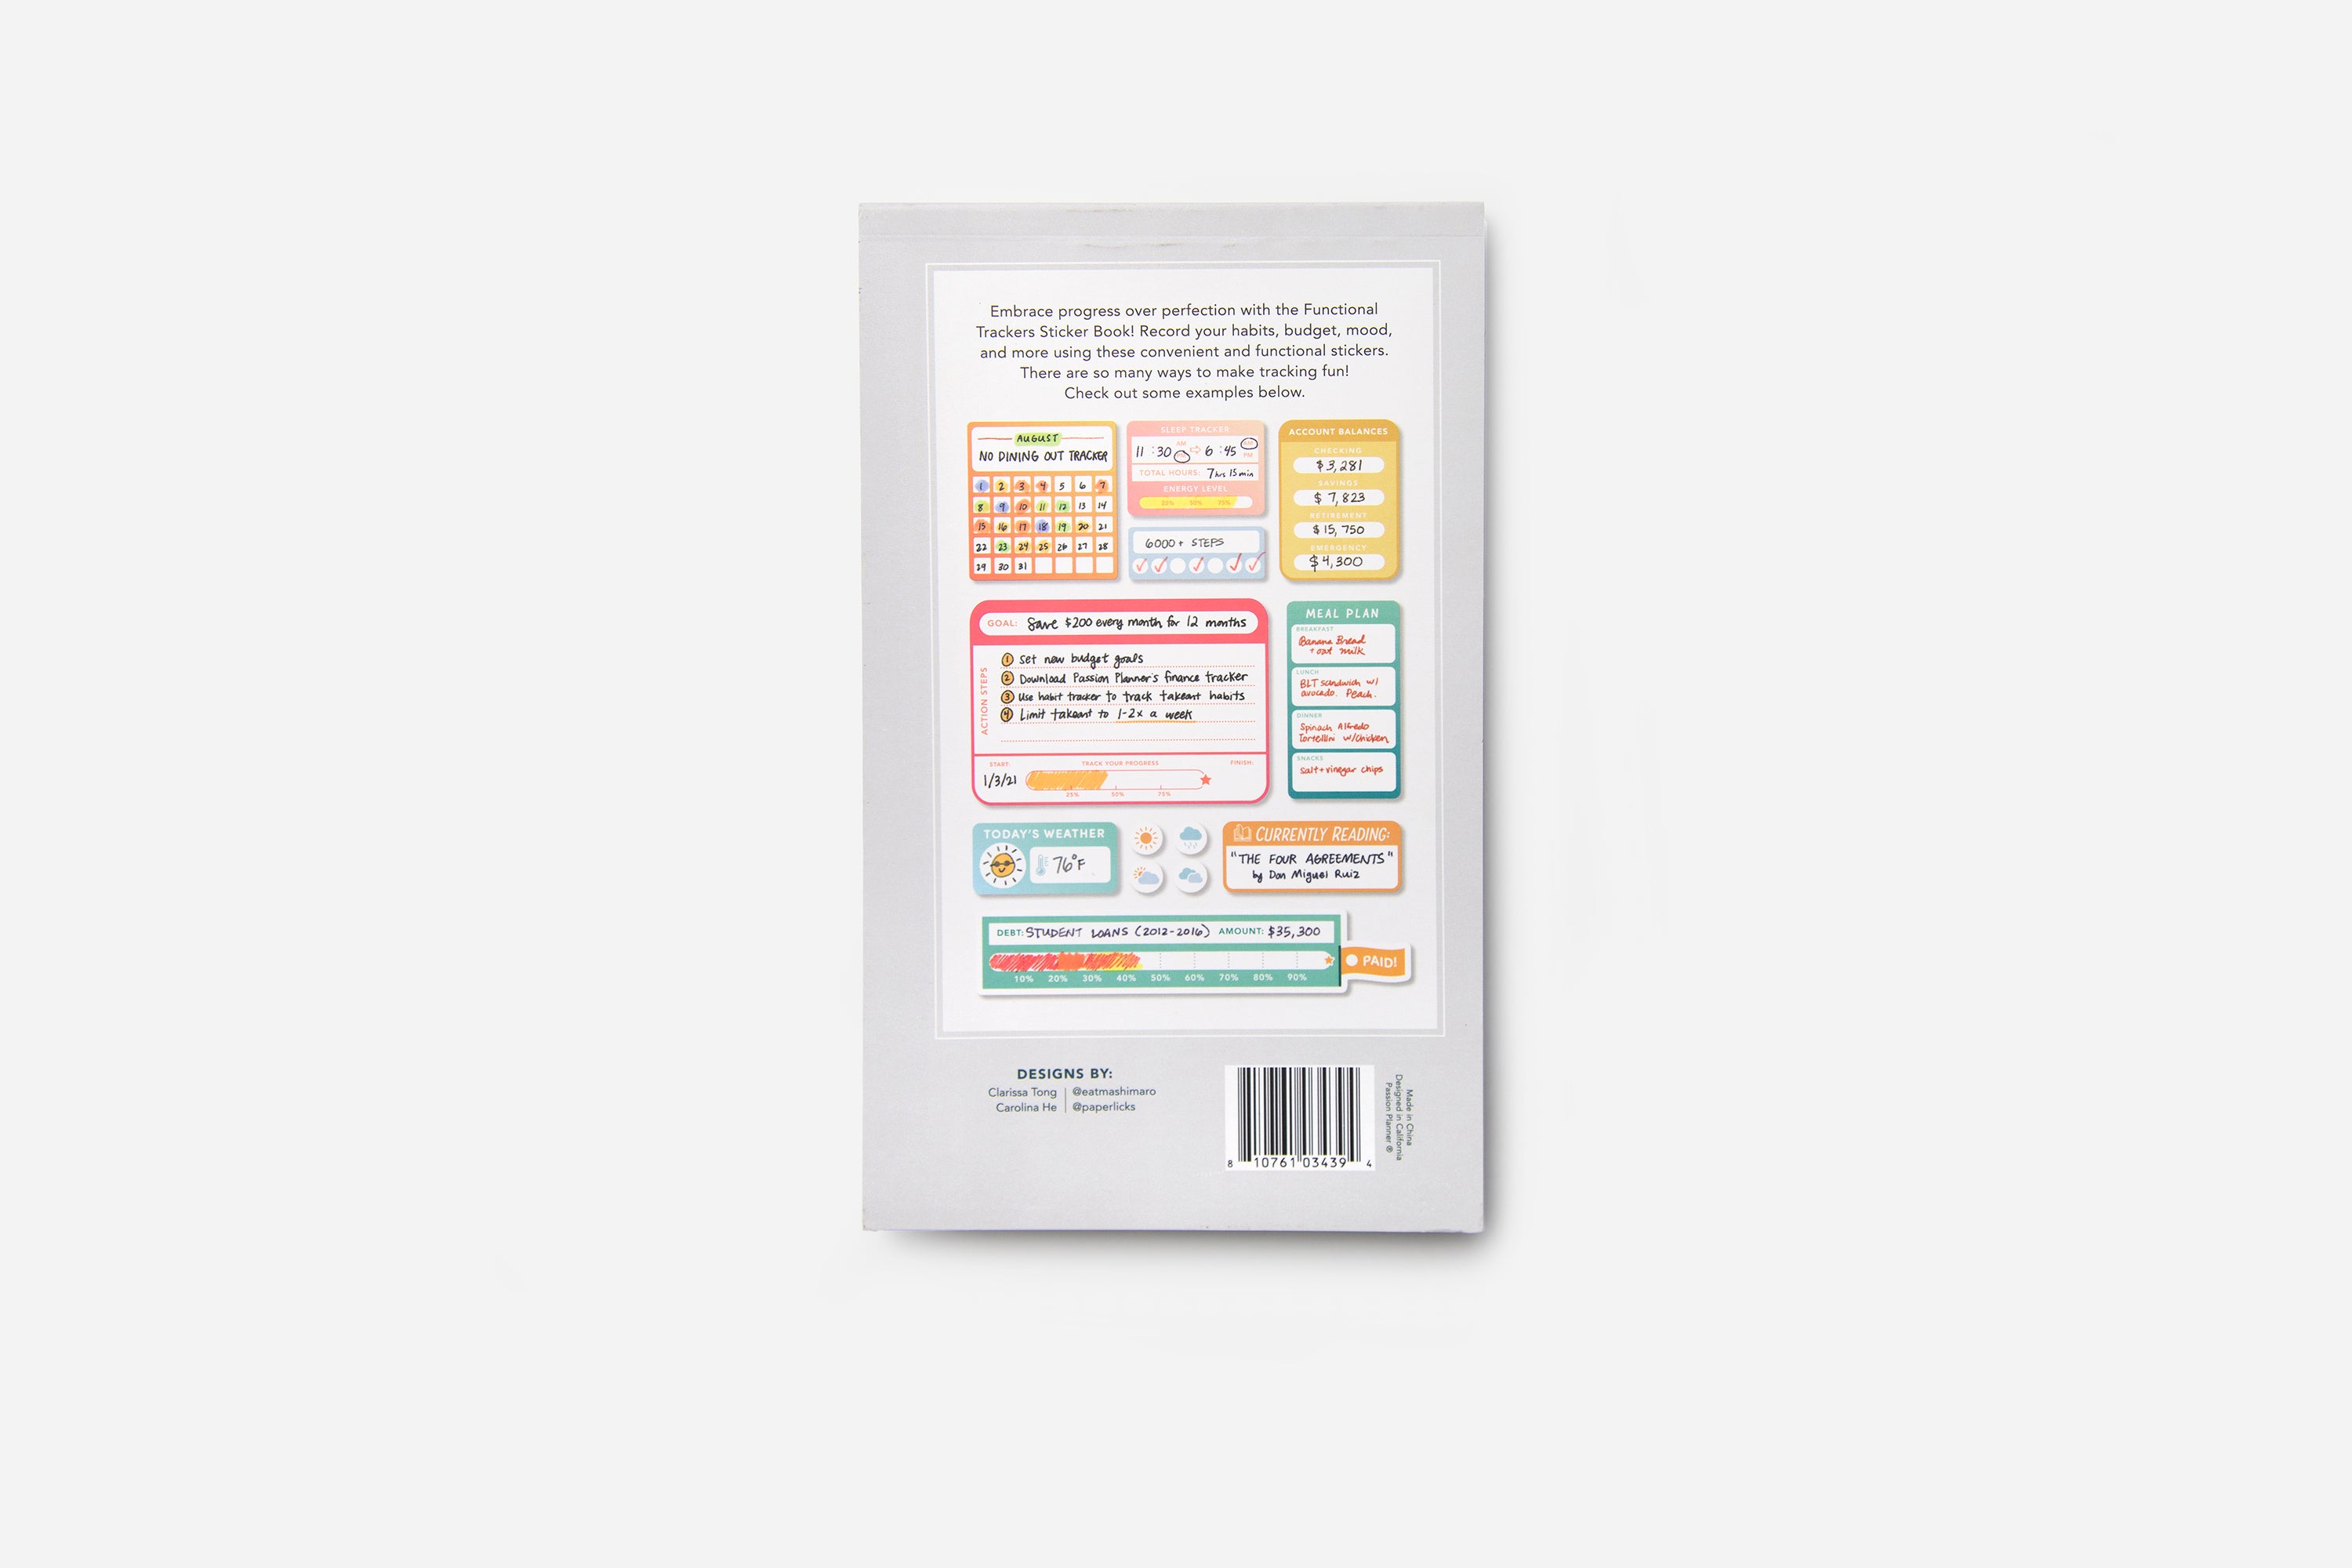 Functional Trackers Sticker Book - Passion Planner